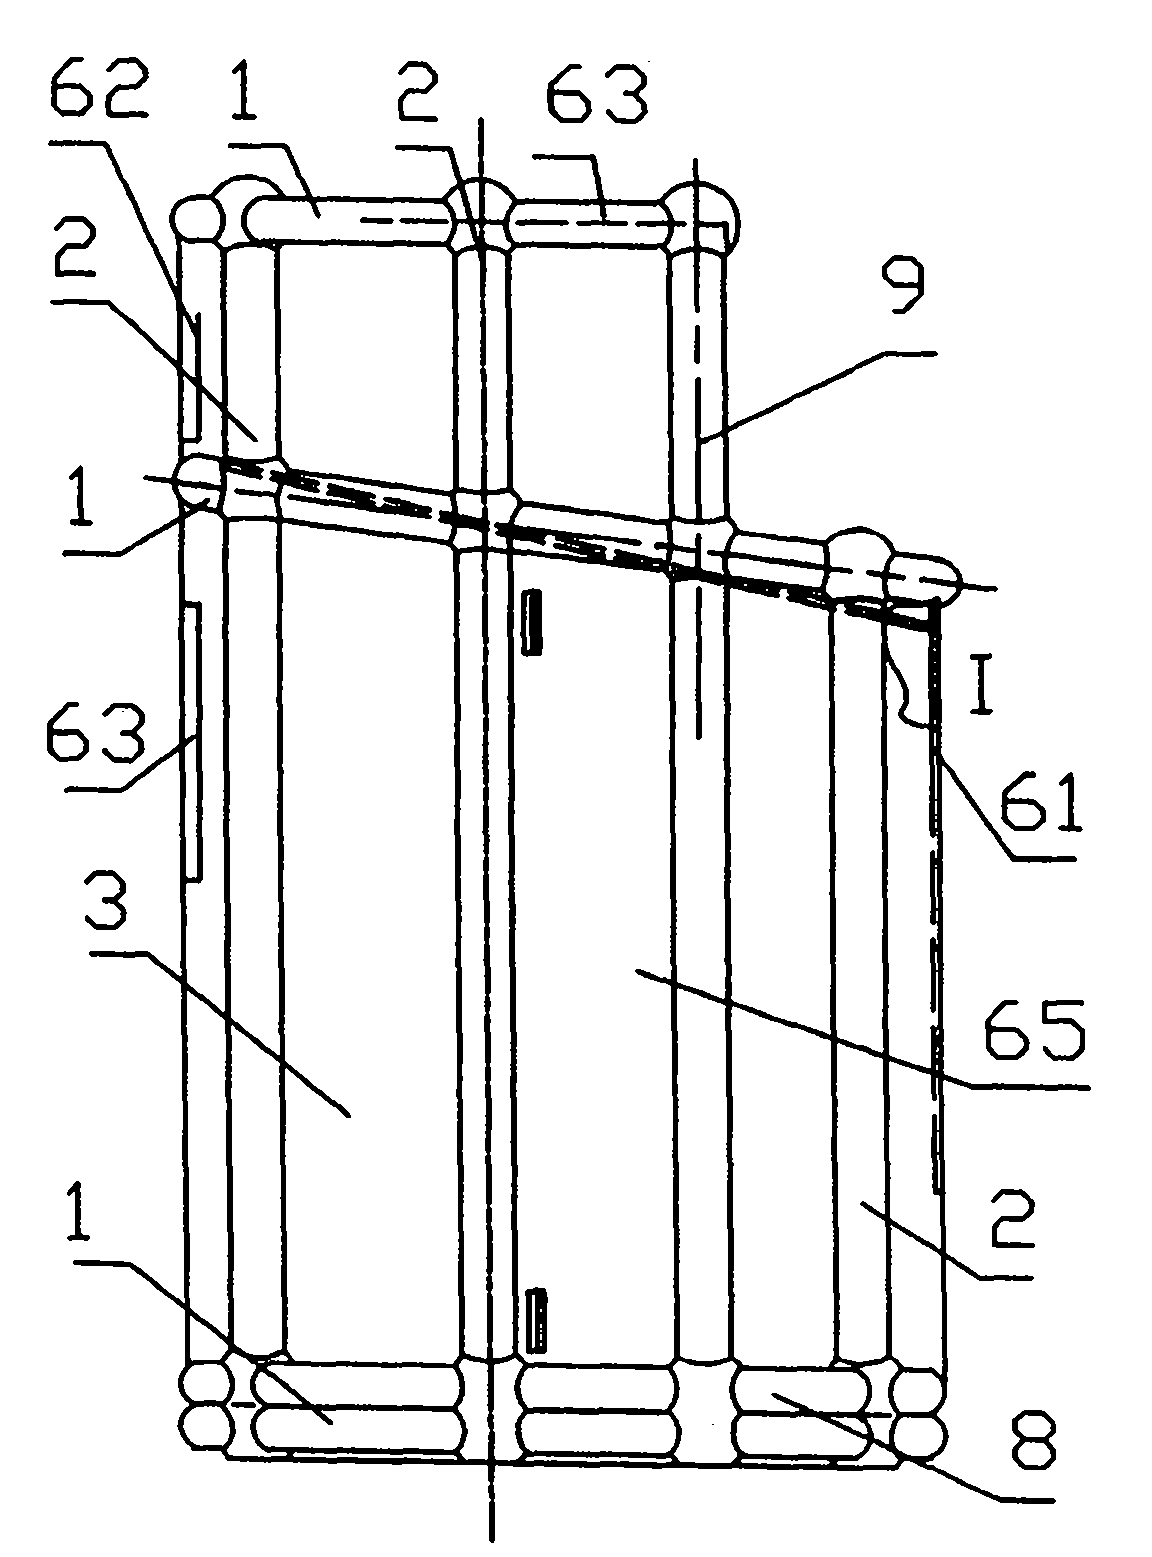 Air-inflation seat-type shower box